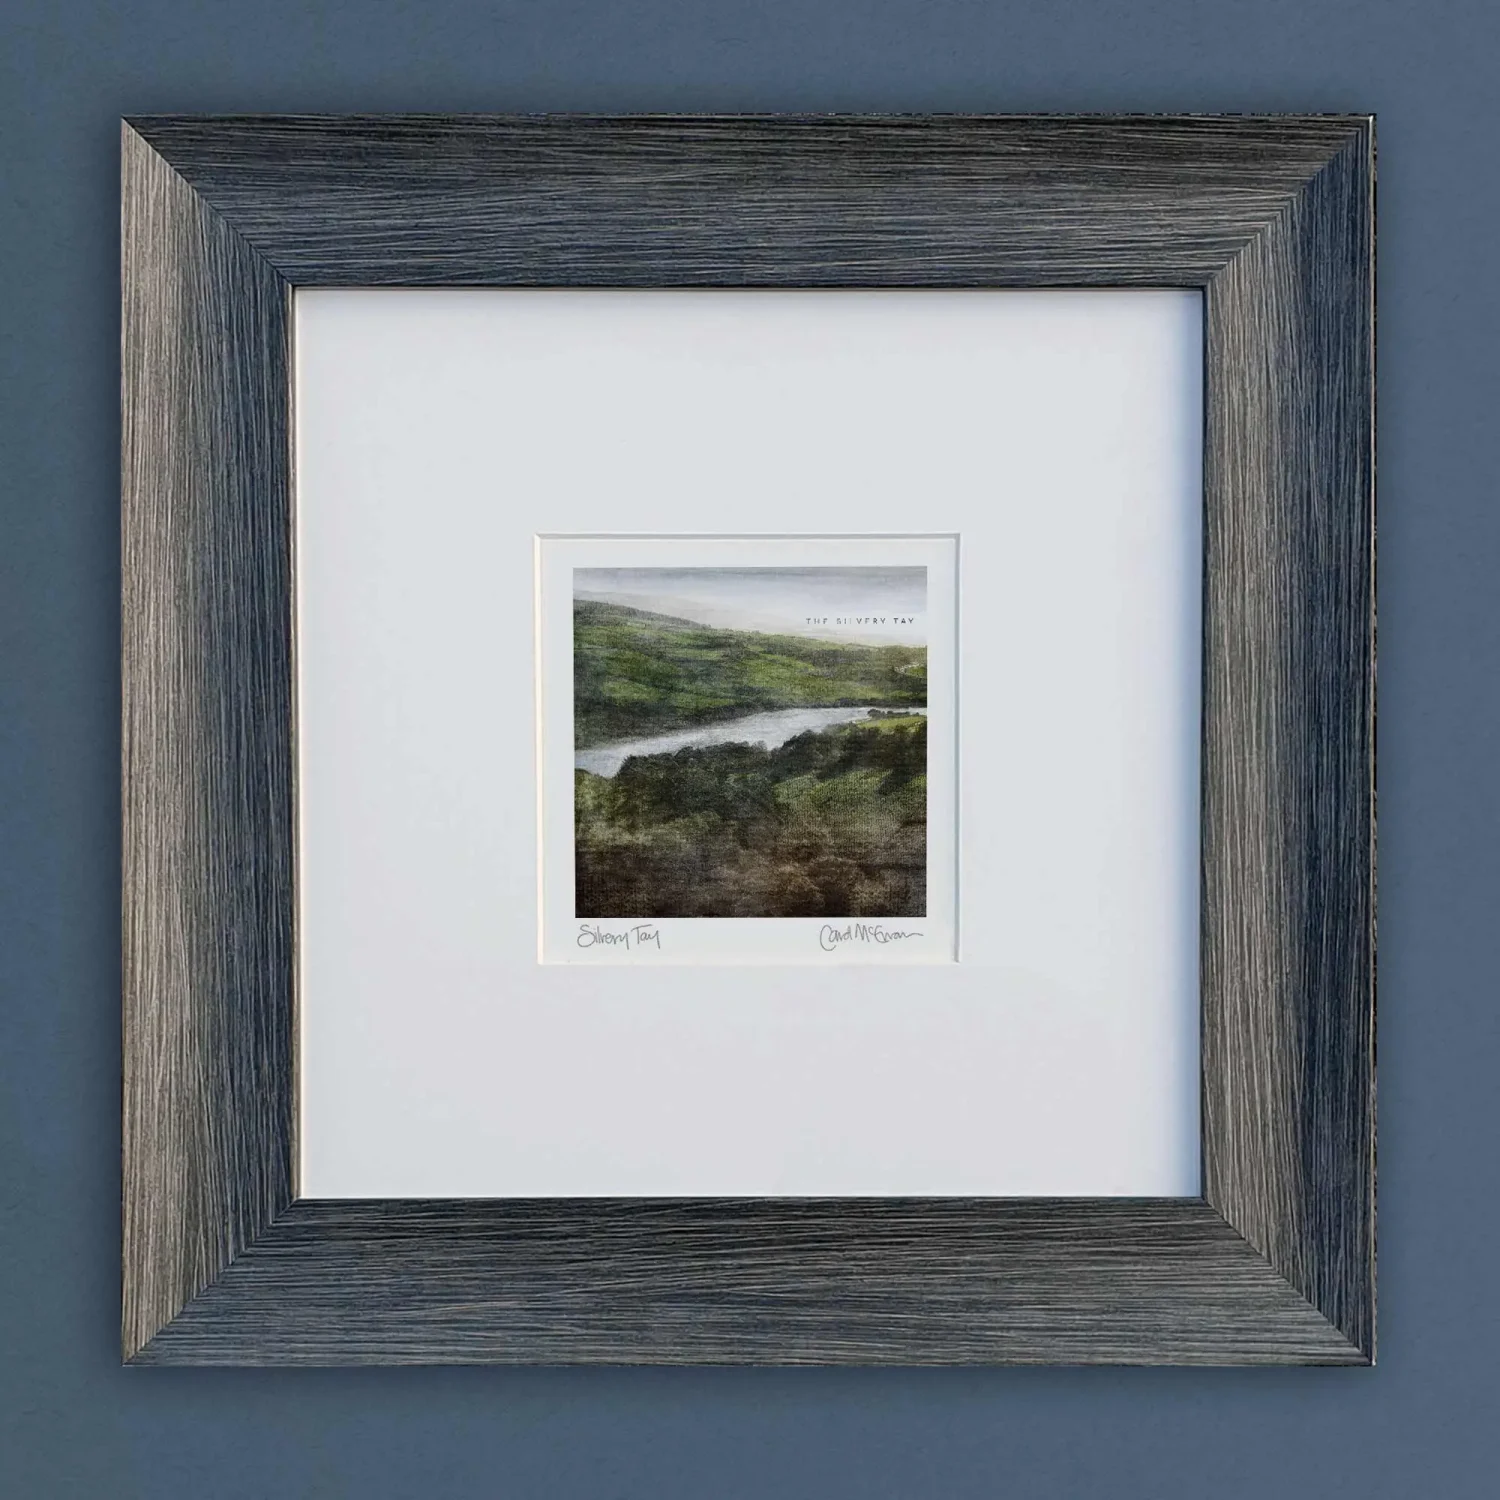 Silvery Tay - frame not included